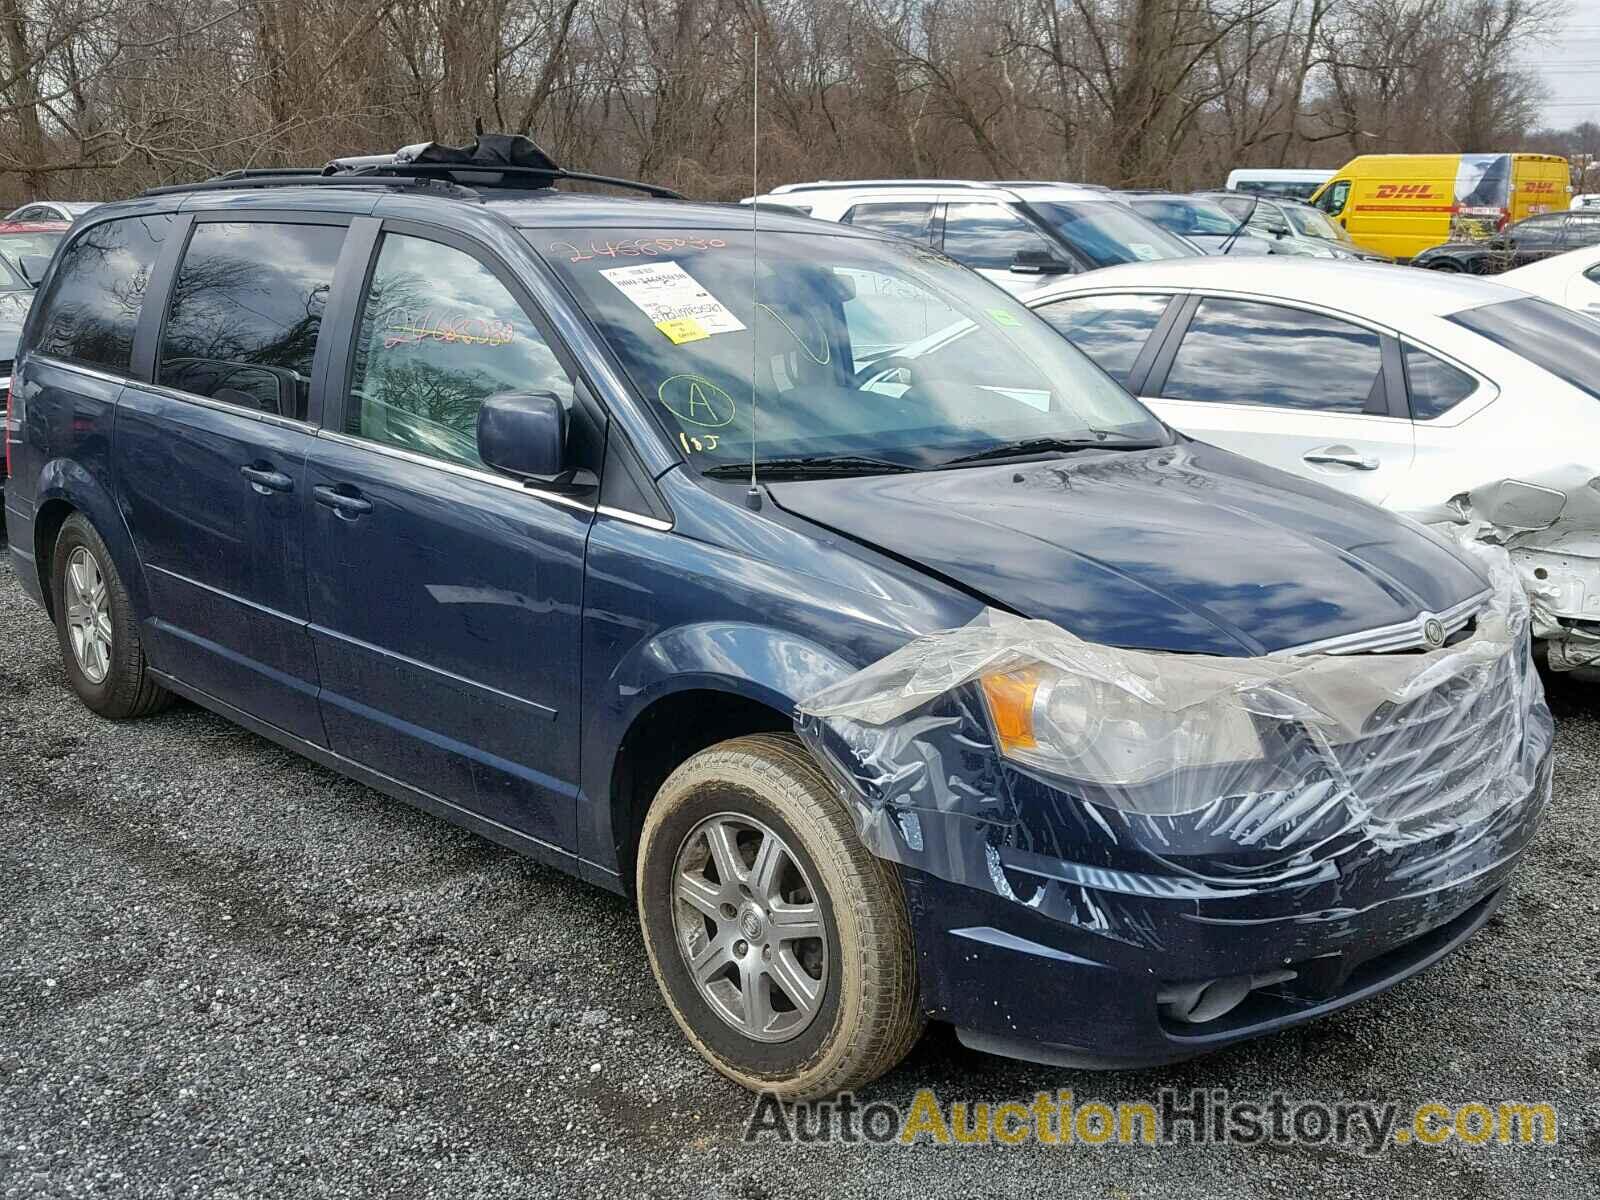 2008 CHRYSLER TOWN & COUNTRY TOURING, 2A8HR54P88R681015